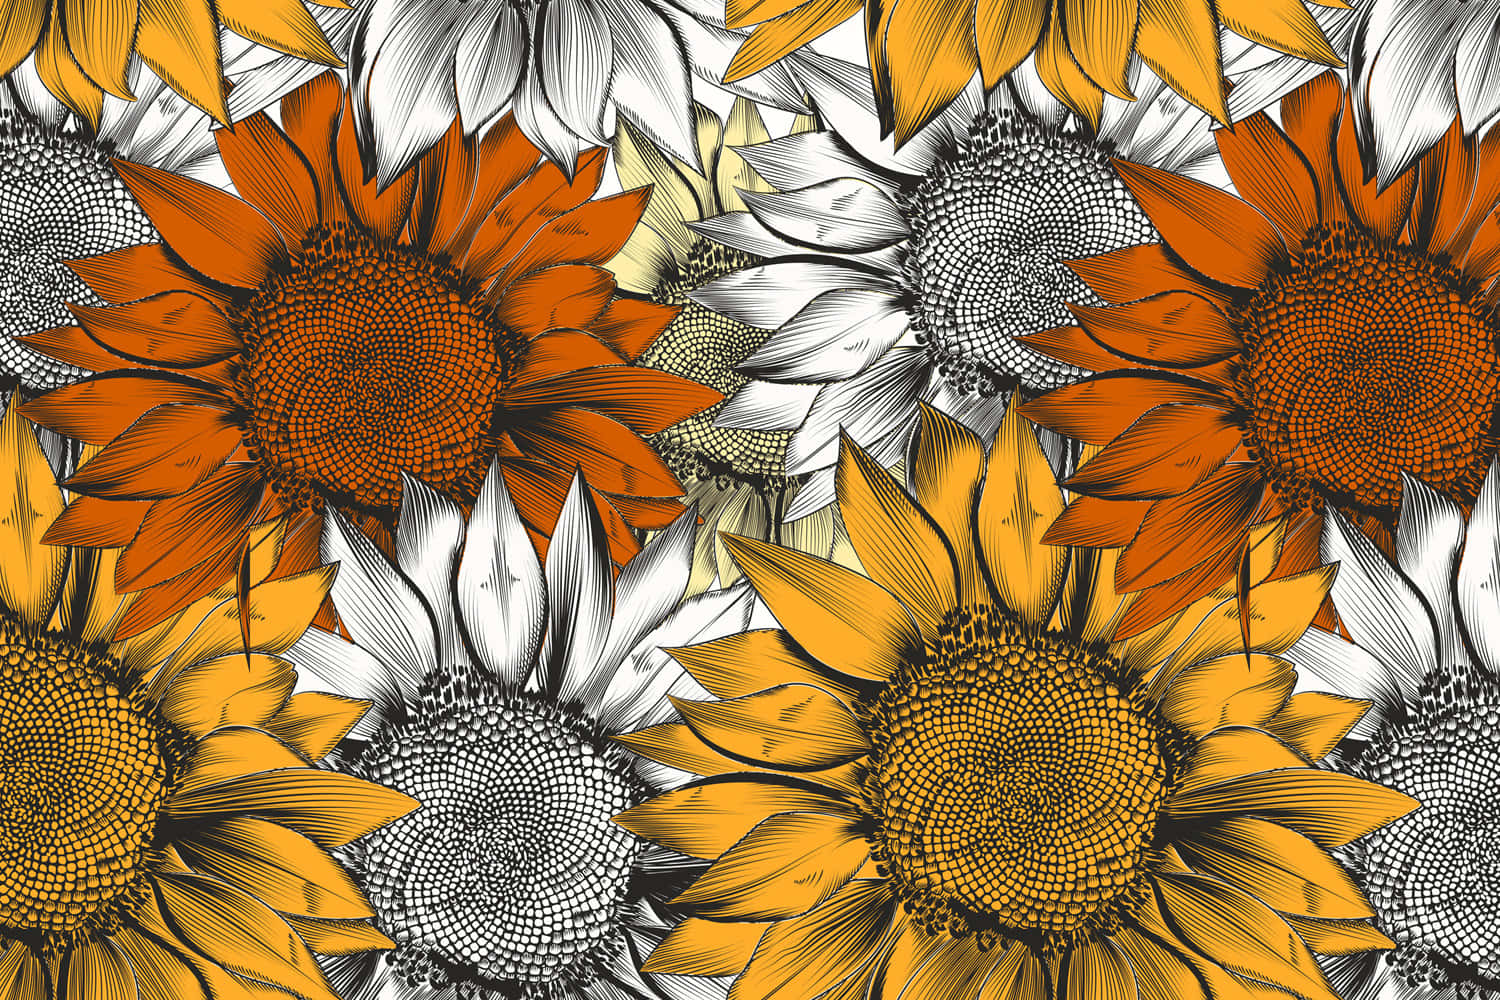 sunflowers in a pattern with orange and white flowers